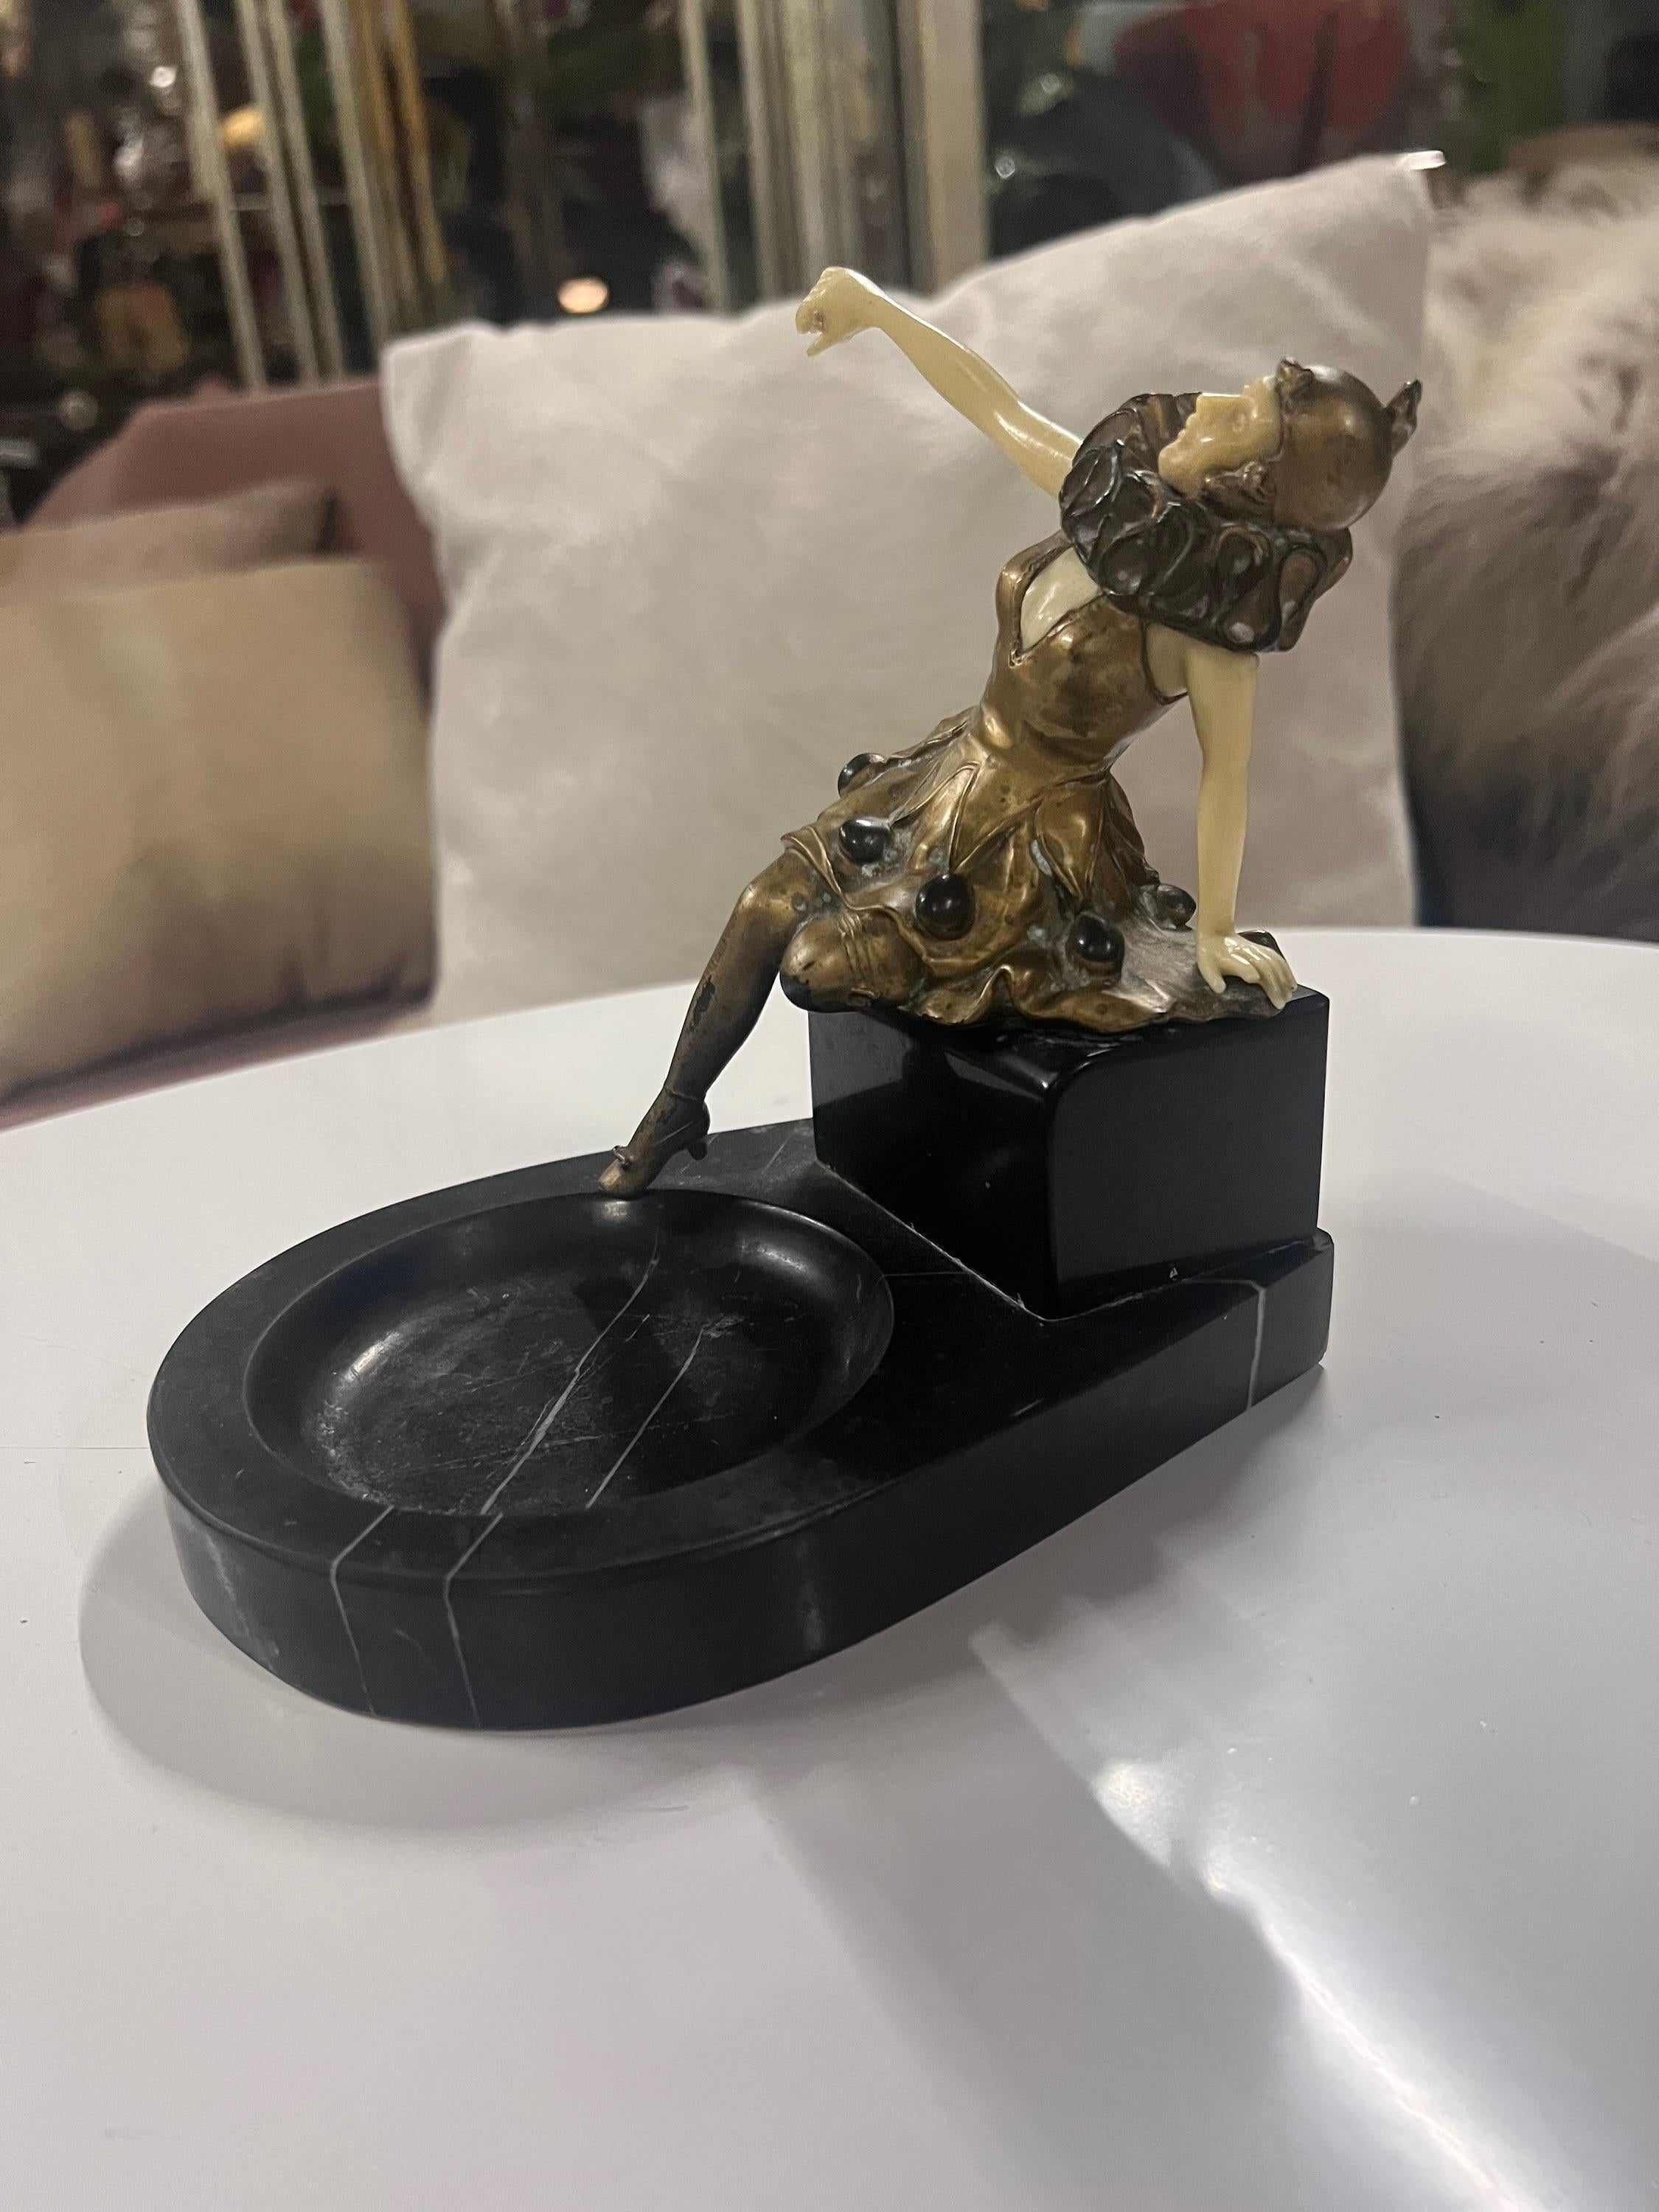 Antique French Art Deco Chryselephantine Bronze Harlequin Posing on Marble Pedestal Ashtray  

This exquisite French Art Deco ashtray is a testament to the opulence and craftsmanship of the early 20th century. Crafted in the Chryselephantine style,